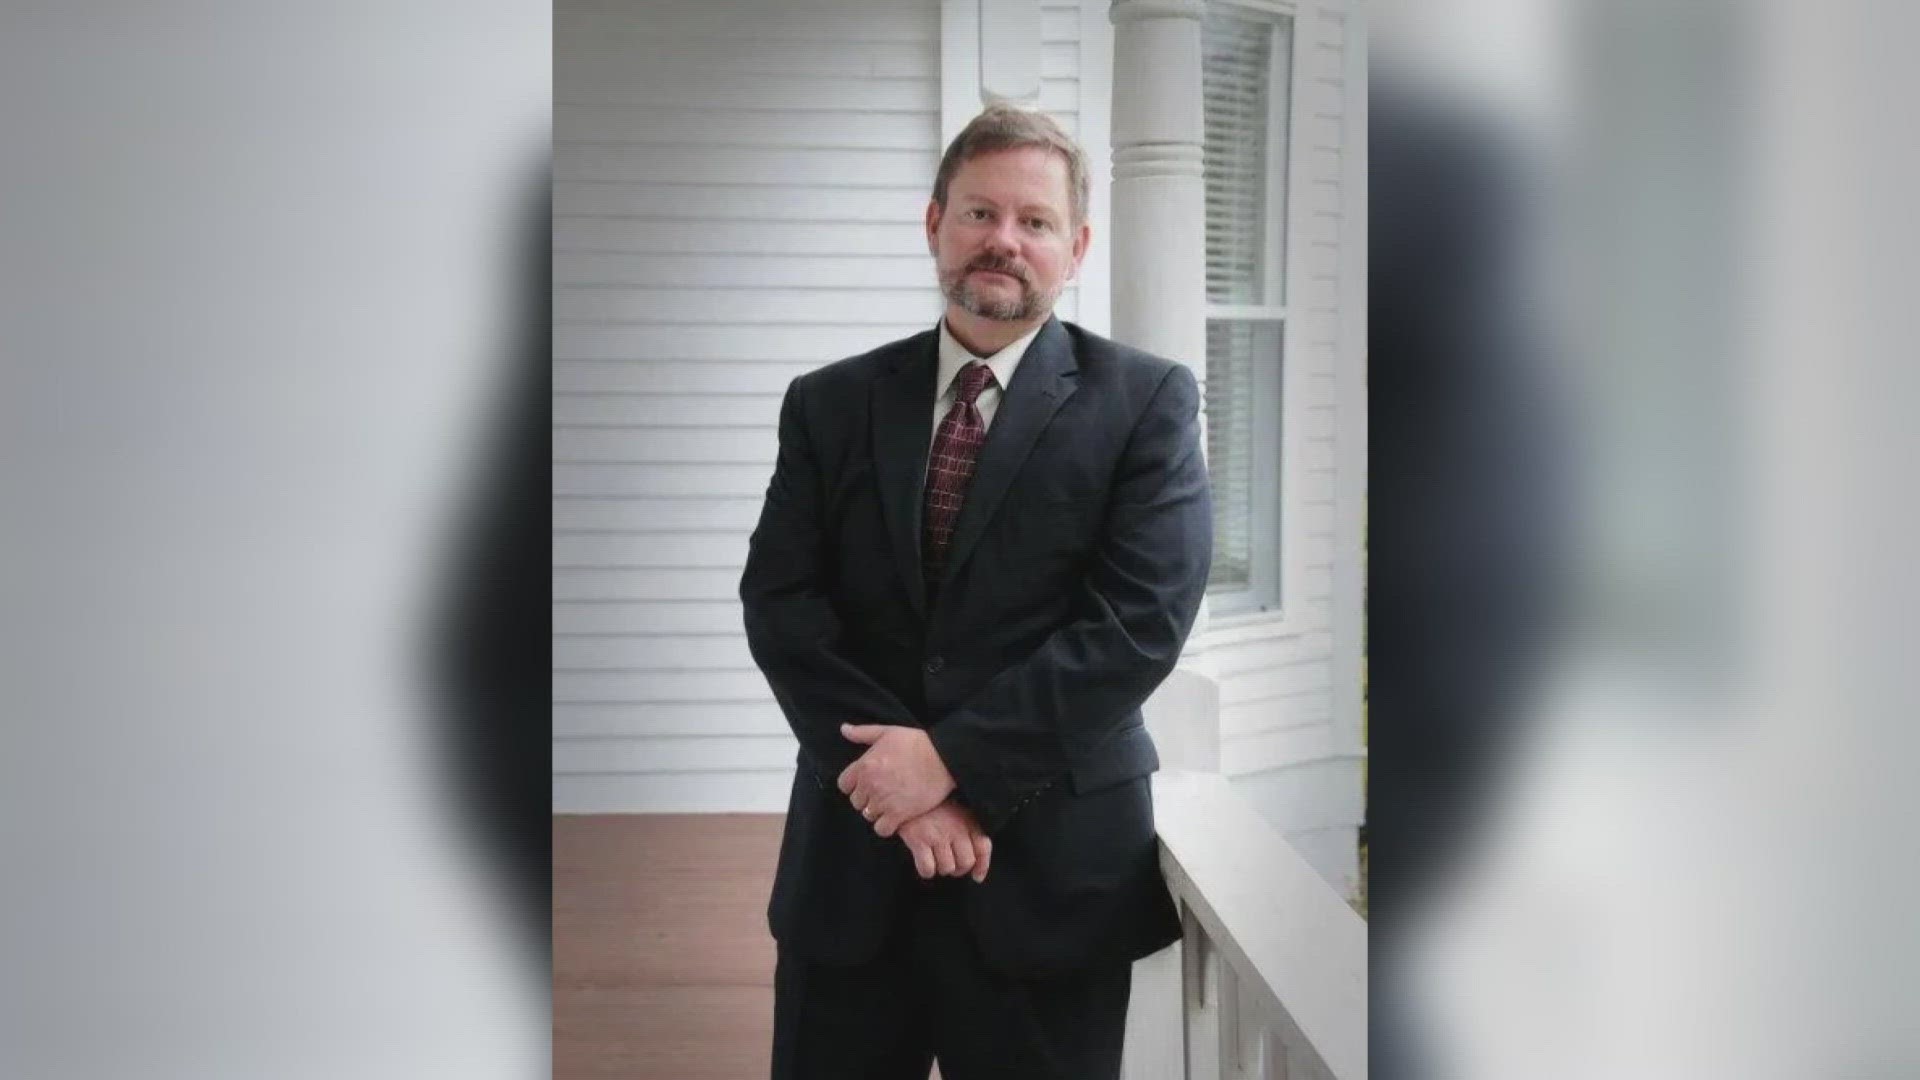 A lawyer who is running for District Attorney in Bell County is facing allegations that he assaulted a woman inside his law office last year.